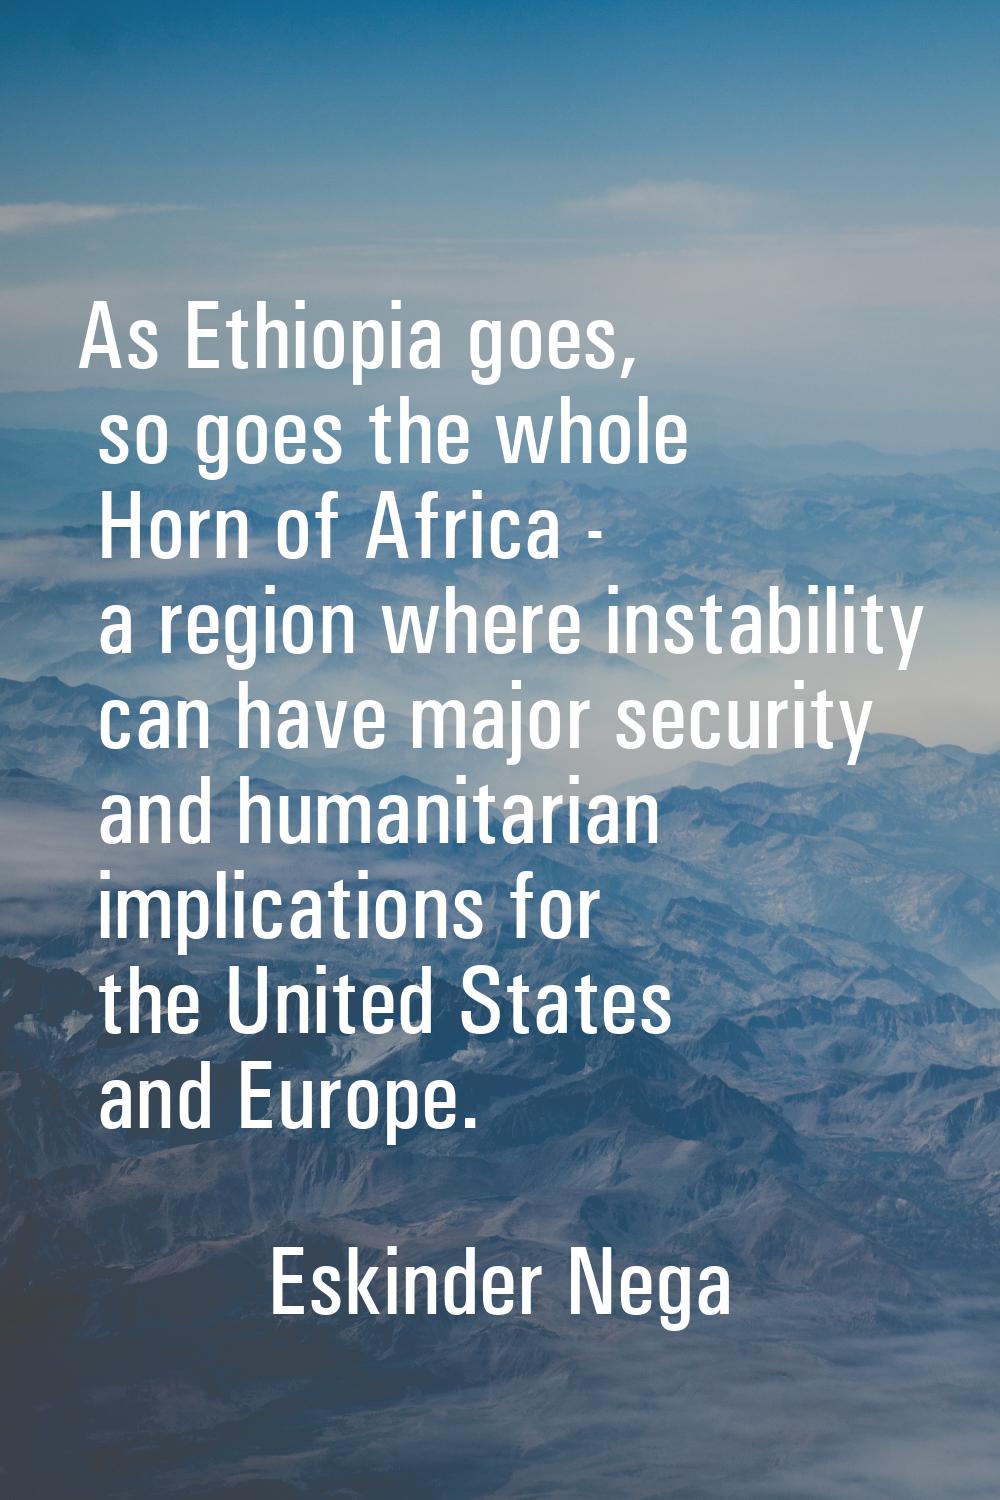 As Ethiopia goes, so goes the whole Horn of Africa - a region where instability can have major secu